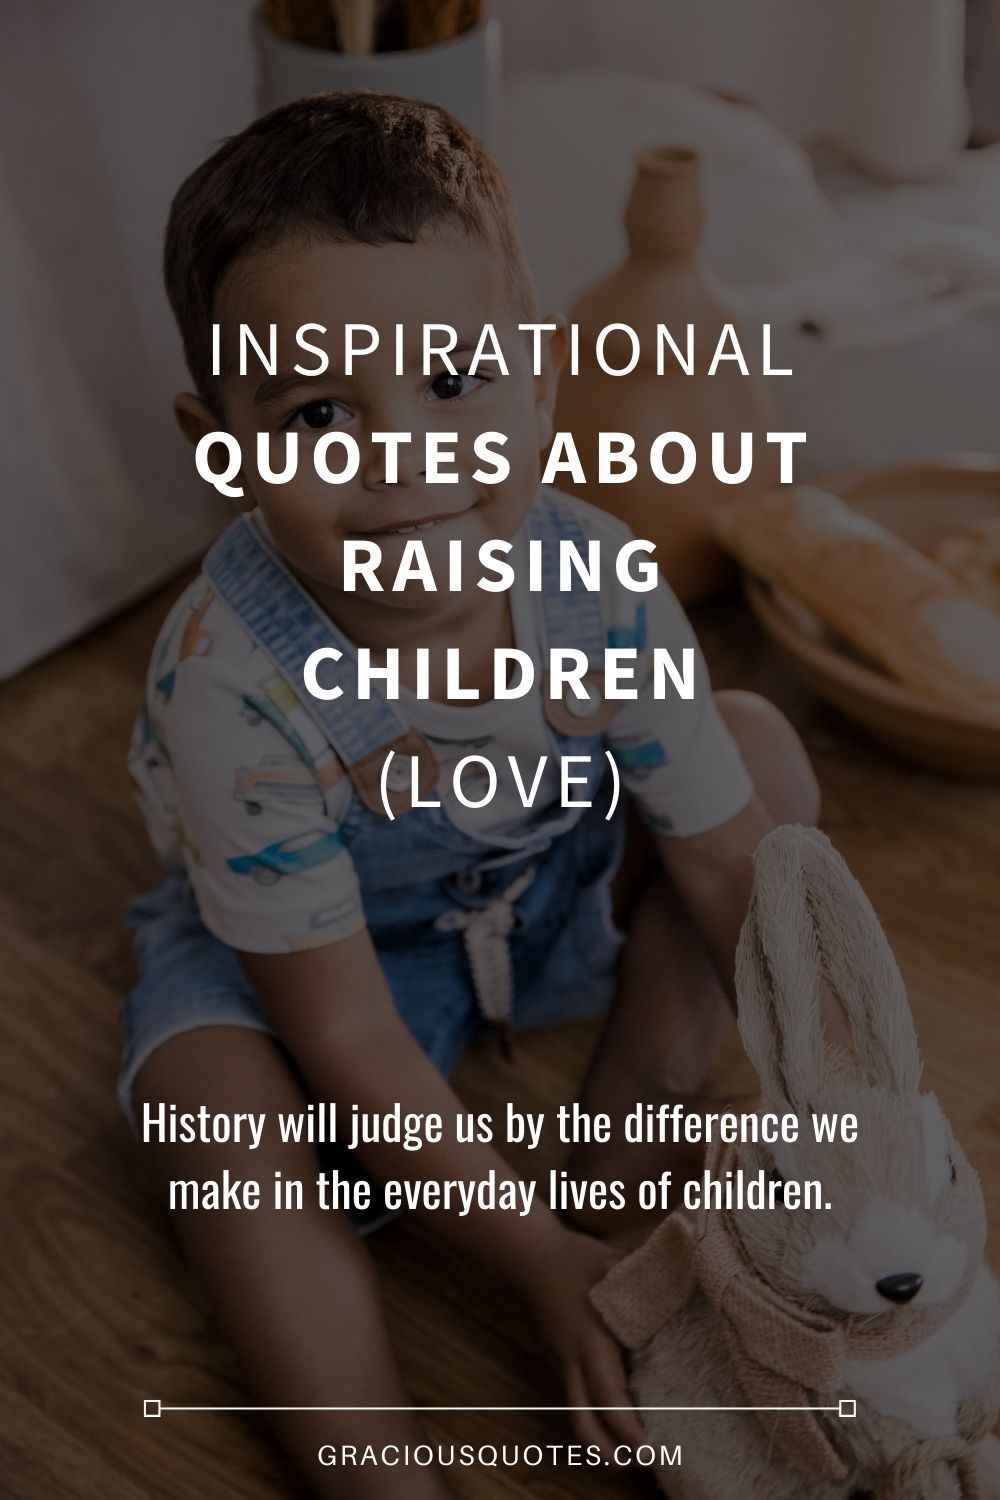 Inspirational Quotes About Raising Children (LOVE) - Gracious Quotes